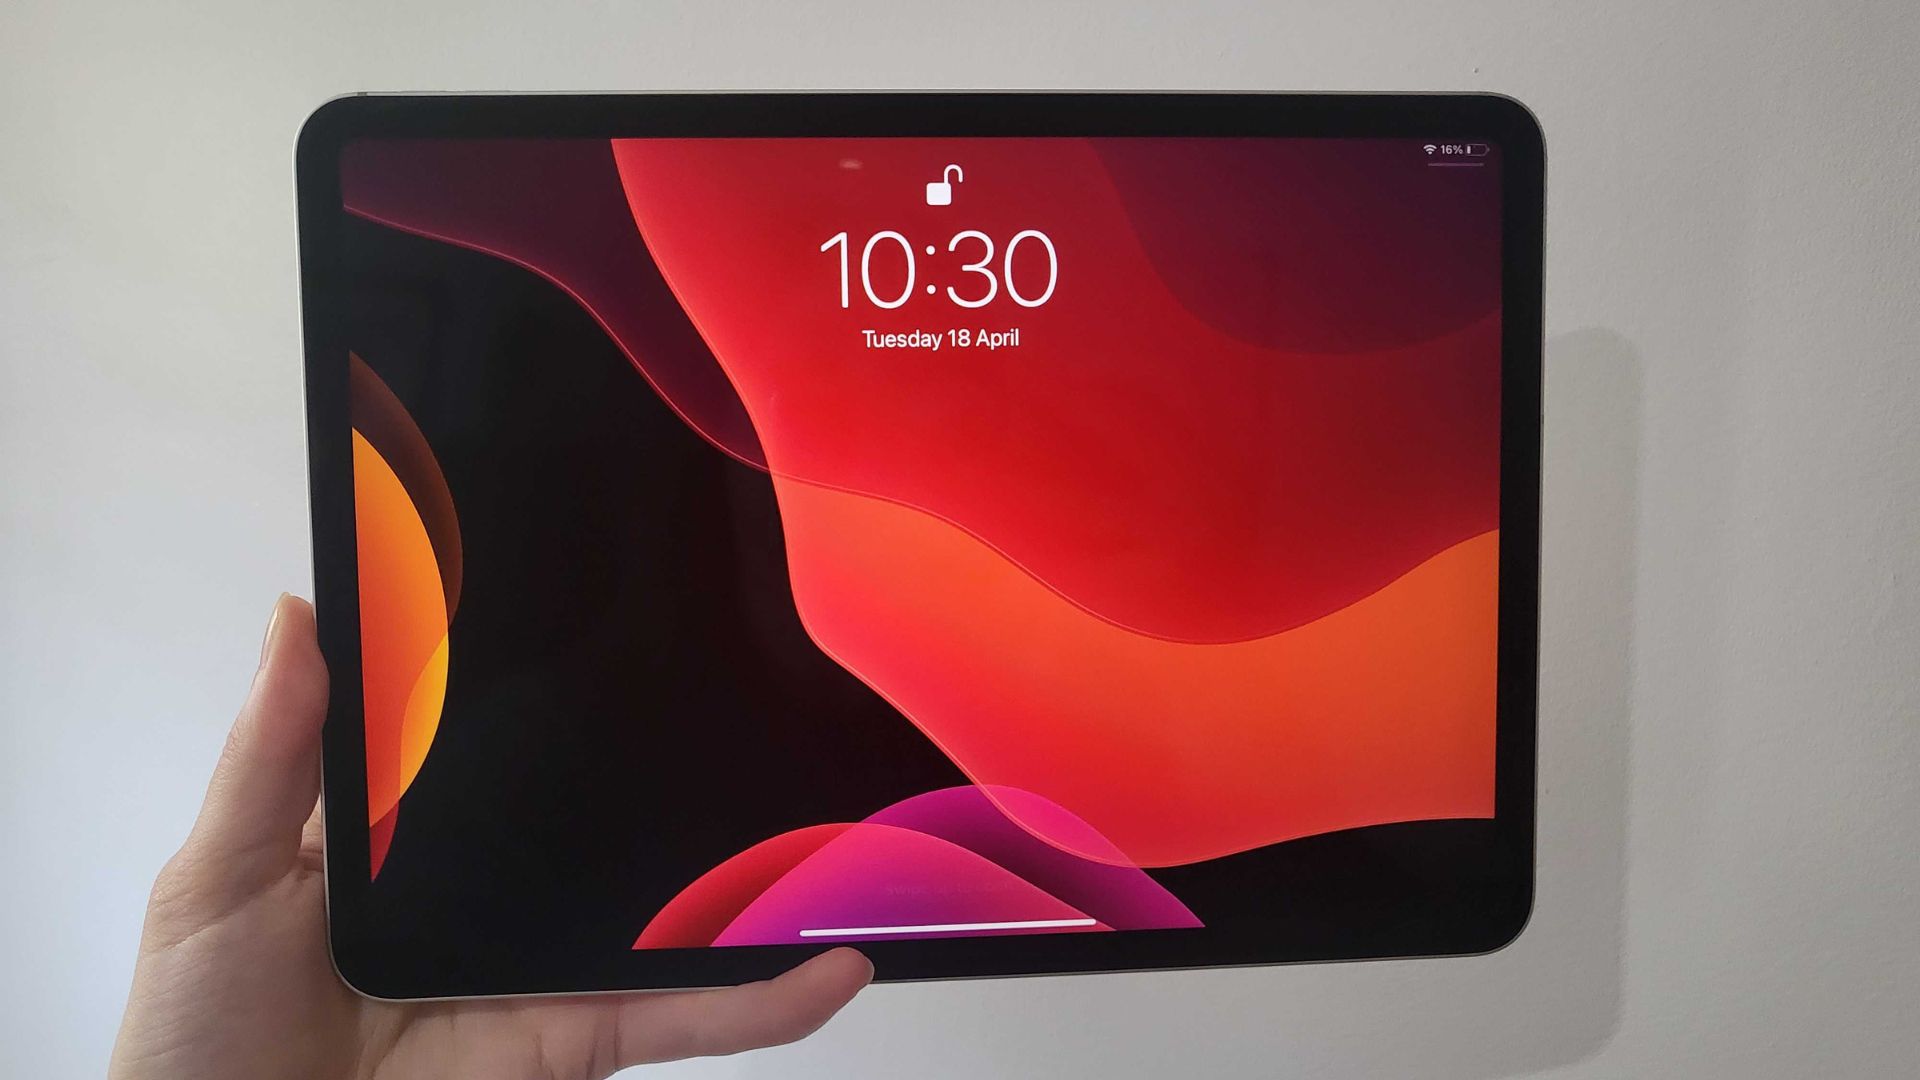 One of the best portable gaming consoles -- an iPad Pro. It is a large square screen with thin black bezels, a time in the middle at the top showing 10:30 and a red and black background. A hand is holding it in the bottom left corner. Behind is a white wall.